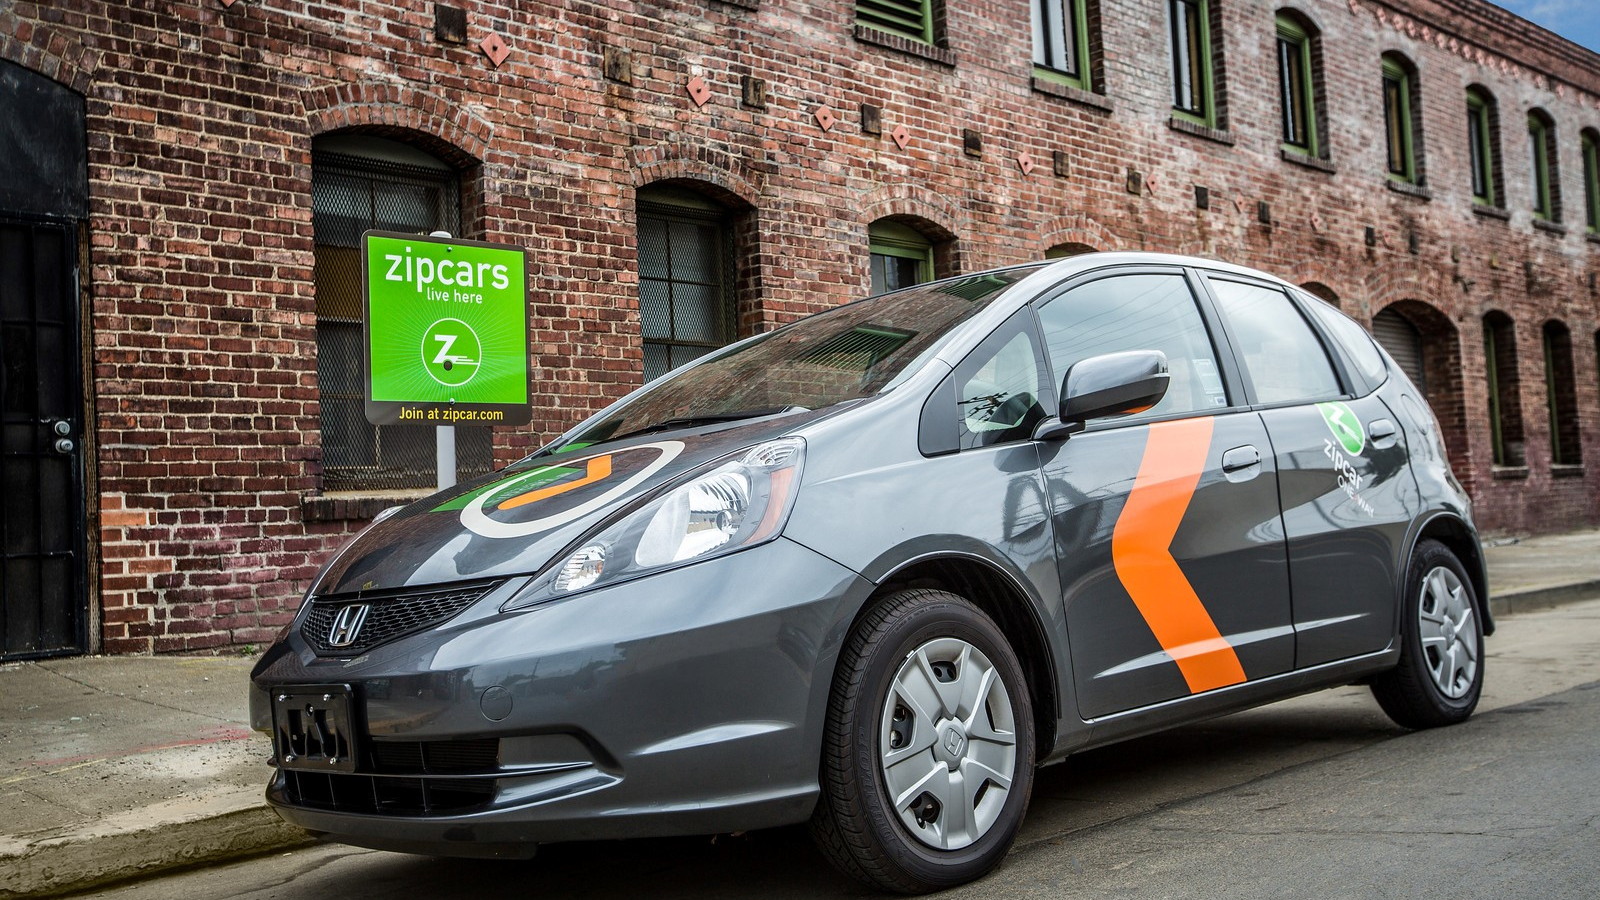 Honda Fit used in ZipCar's ONE>WAY car-sharing service